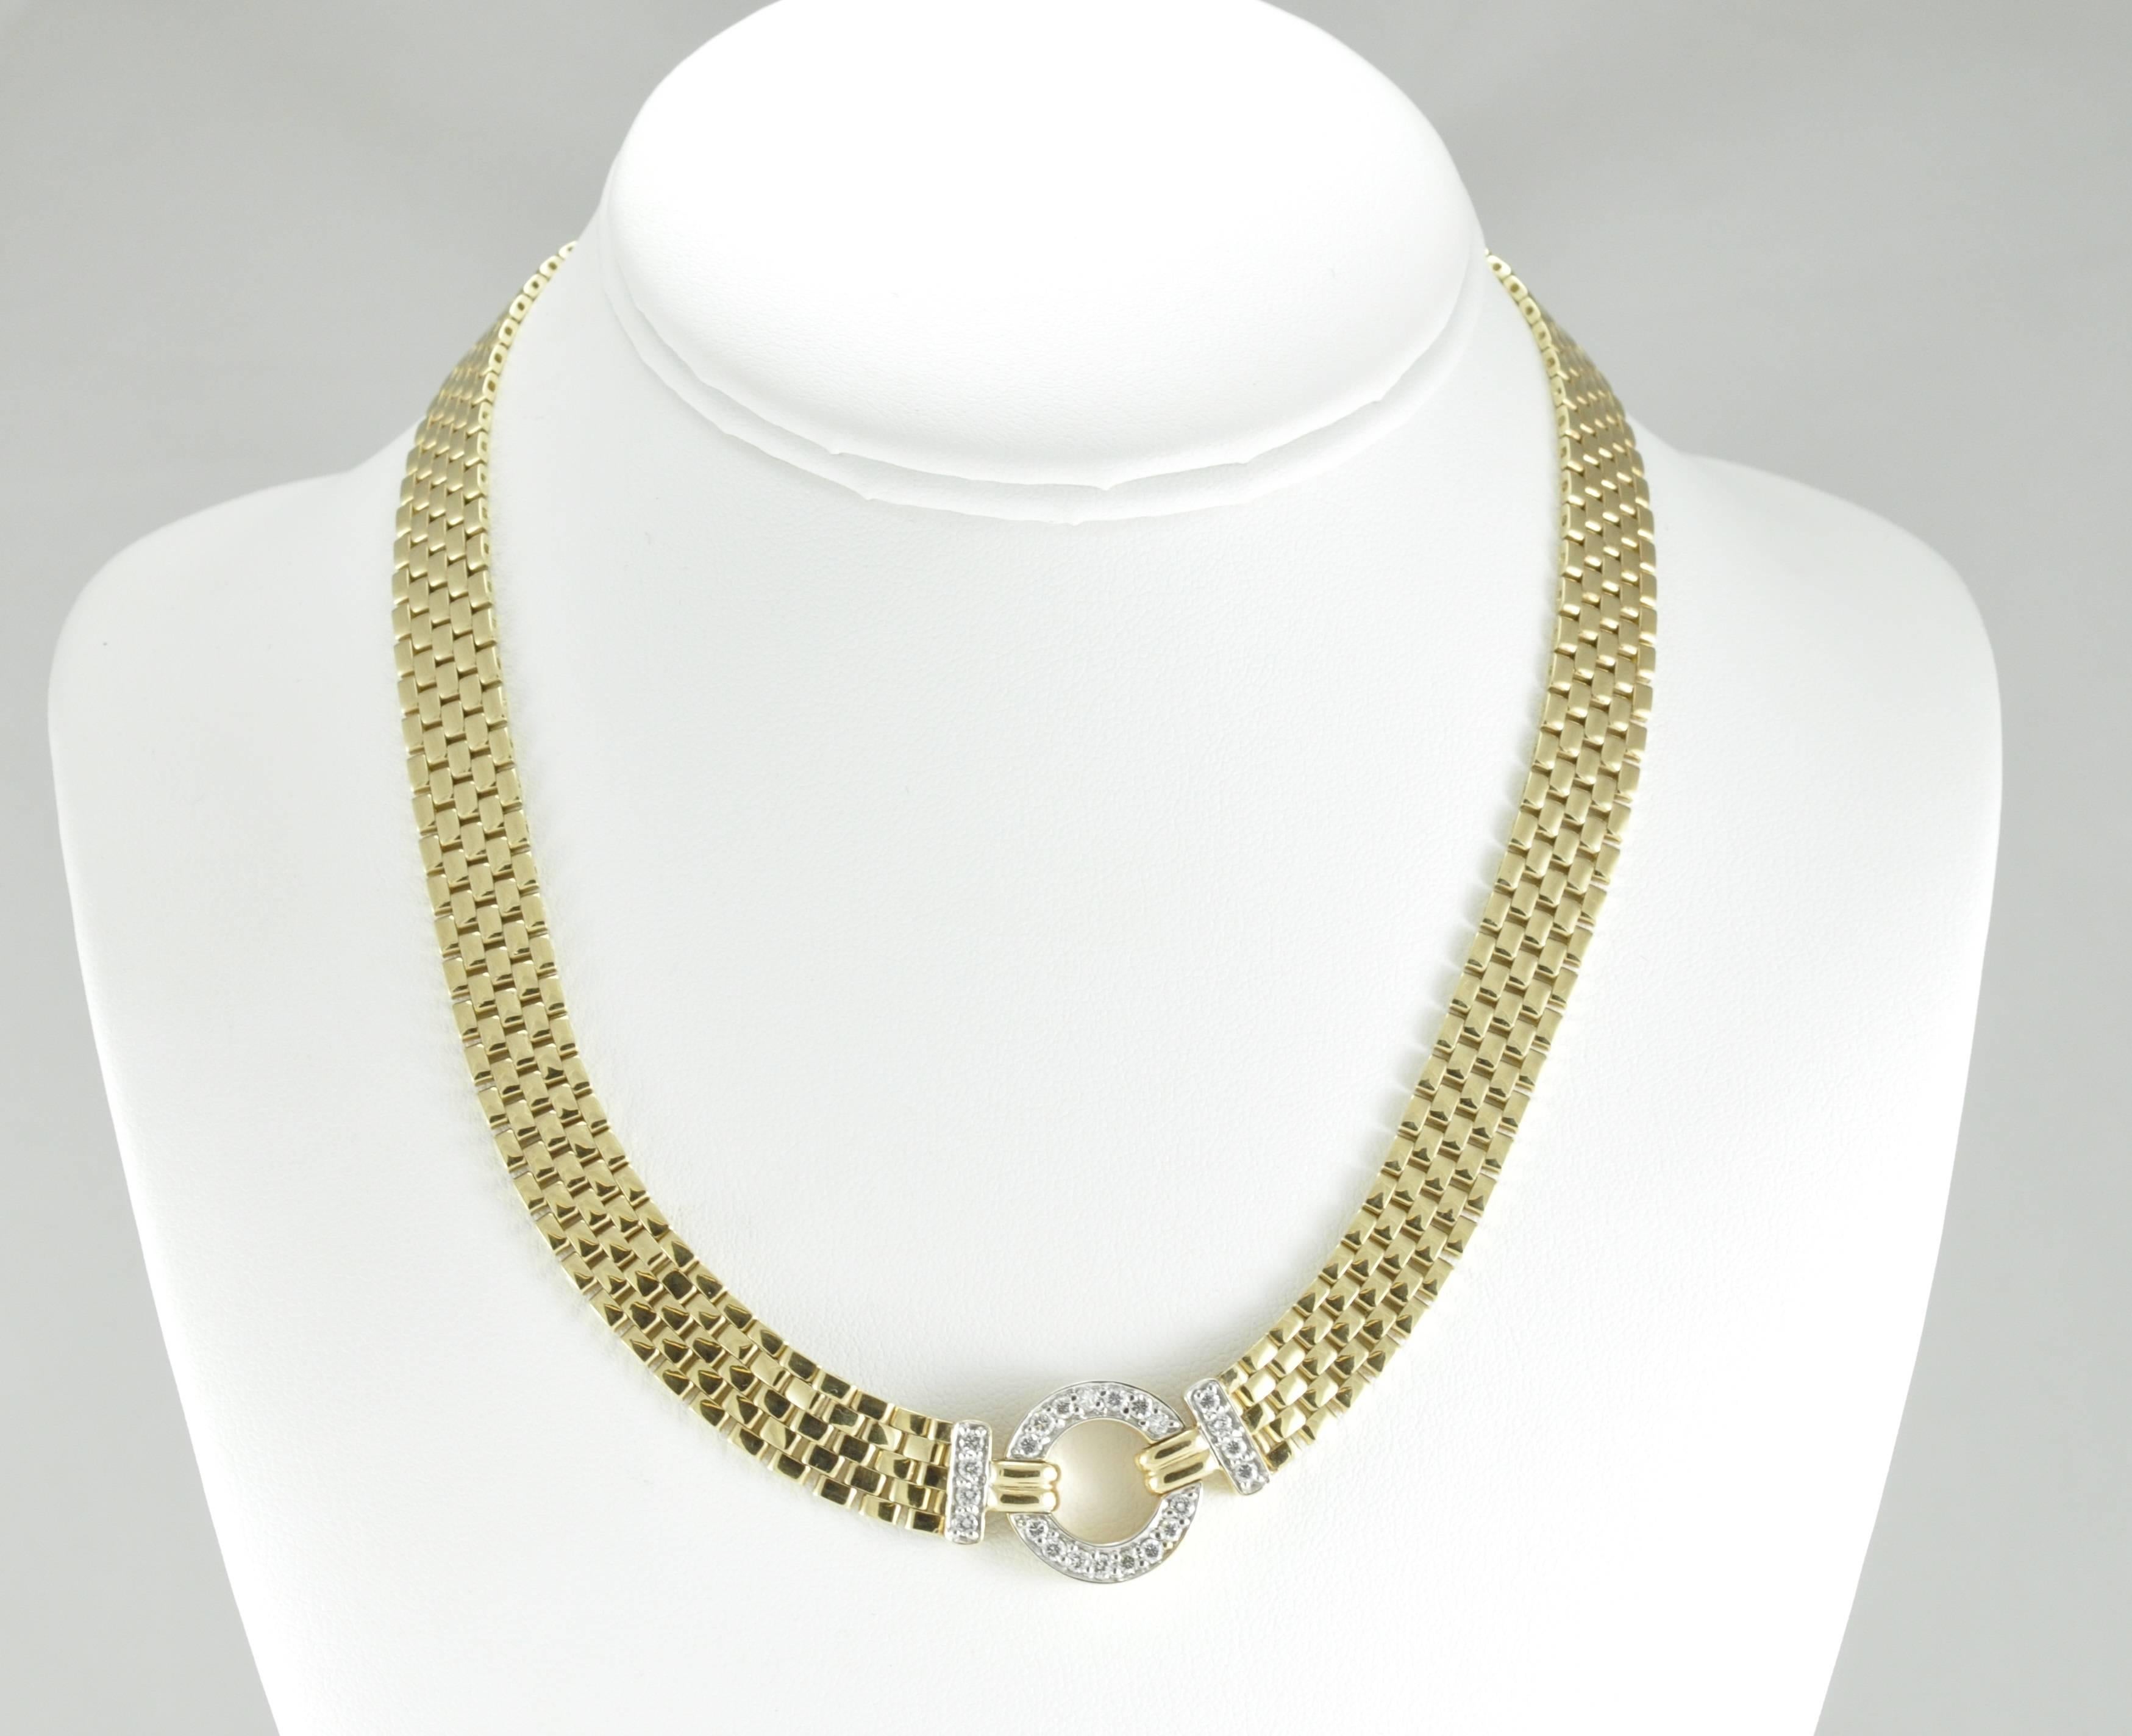 14k Yellow Gold Woven, Panther style necklace featuring 1.1ctw Diamond Circle. 
The necklace clasp is stamped ITALY and 686. This item measures 16 inches in length.